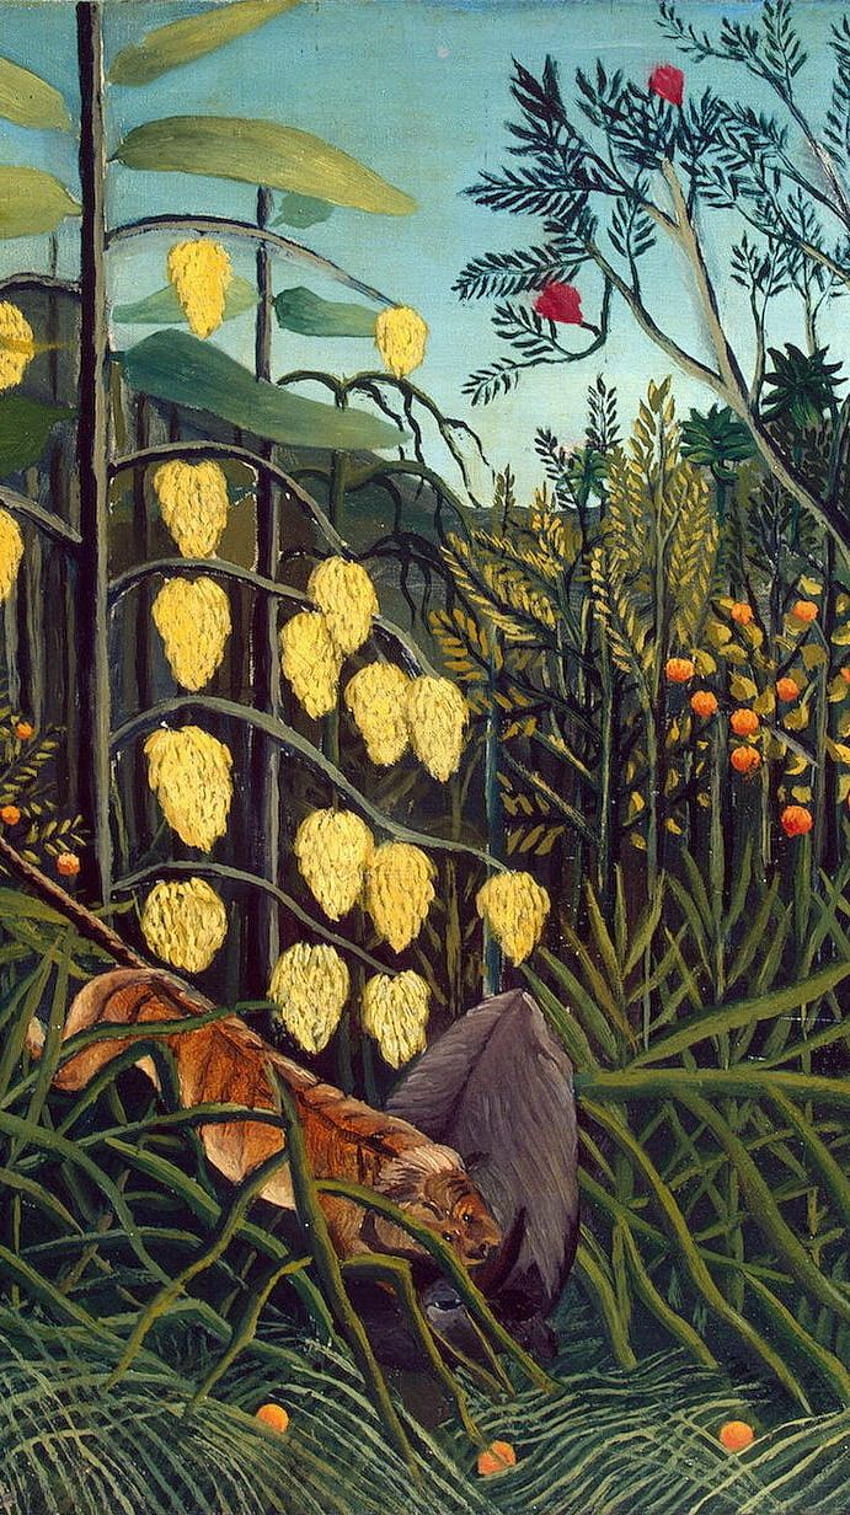 All sizes  Henri Rousseau The repast of the lion detail 1907  Flickr   Photo Sharing  Naive art Painting Henri rousseau